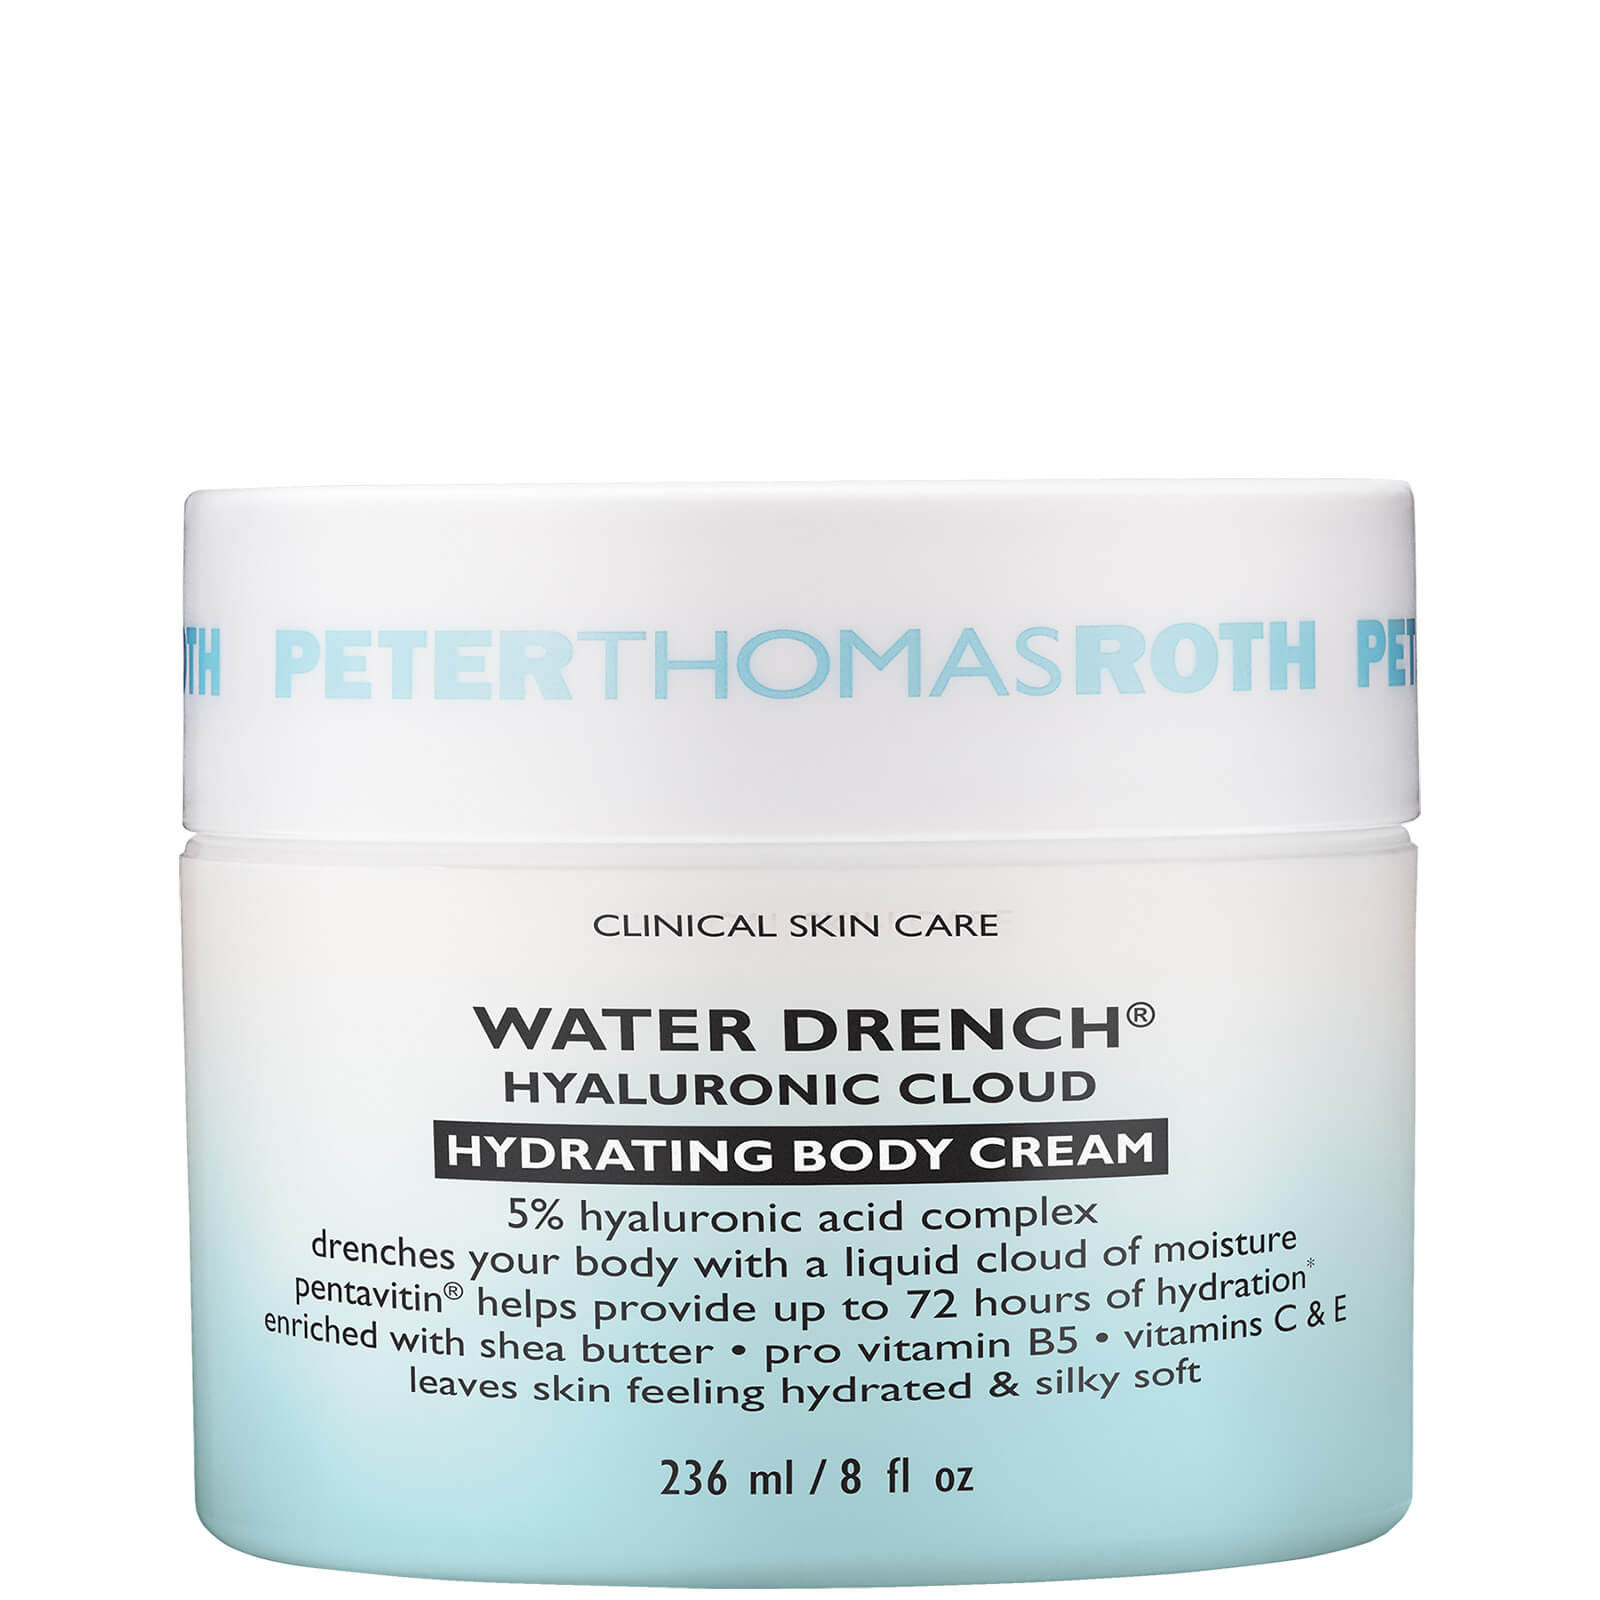 Photos - Cream / Lotion Roth Peter Thomas  Water Drench Hyaluronic Cloud Hydrating Body Cream 236ml 